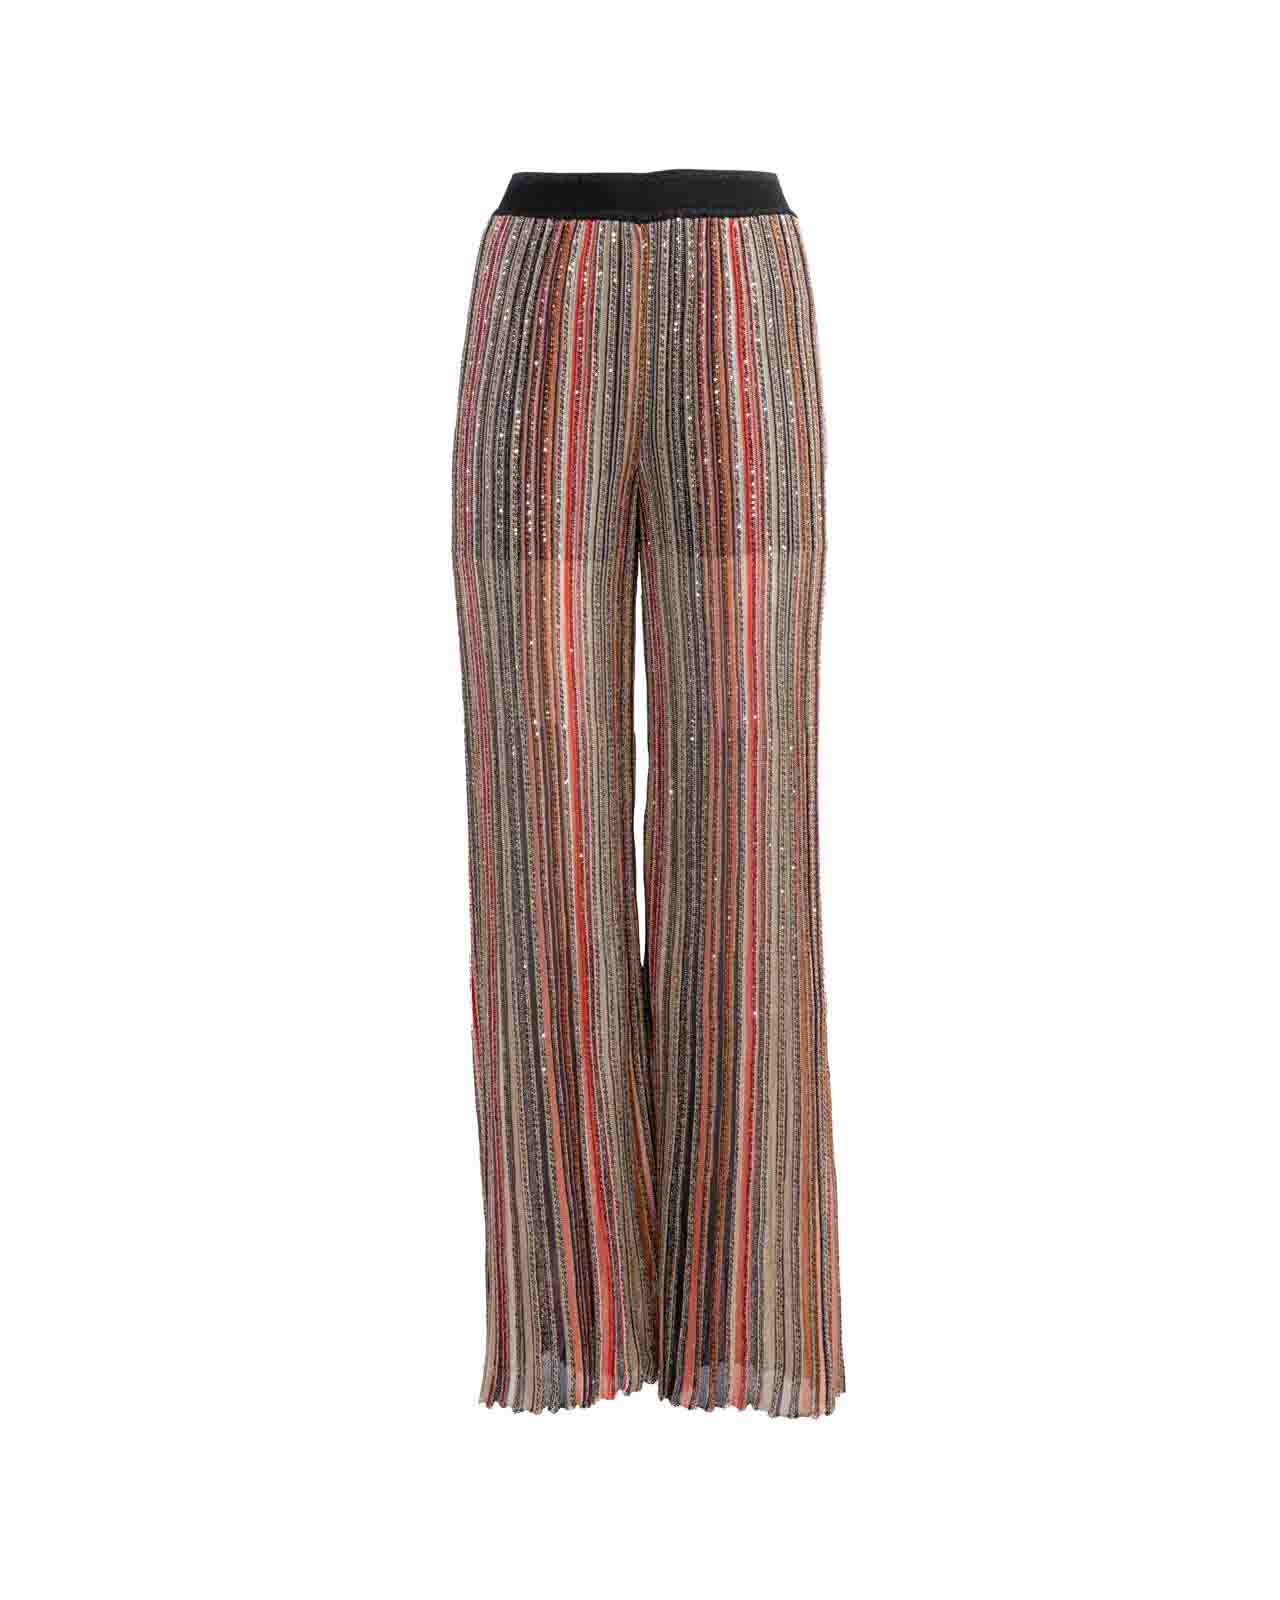 MISSONI VERTICAL STRIPED KNIT TROUSERS